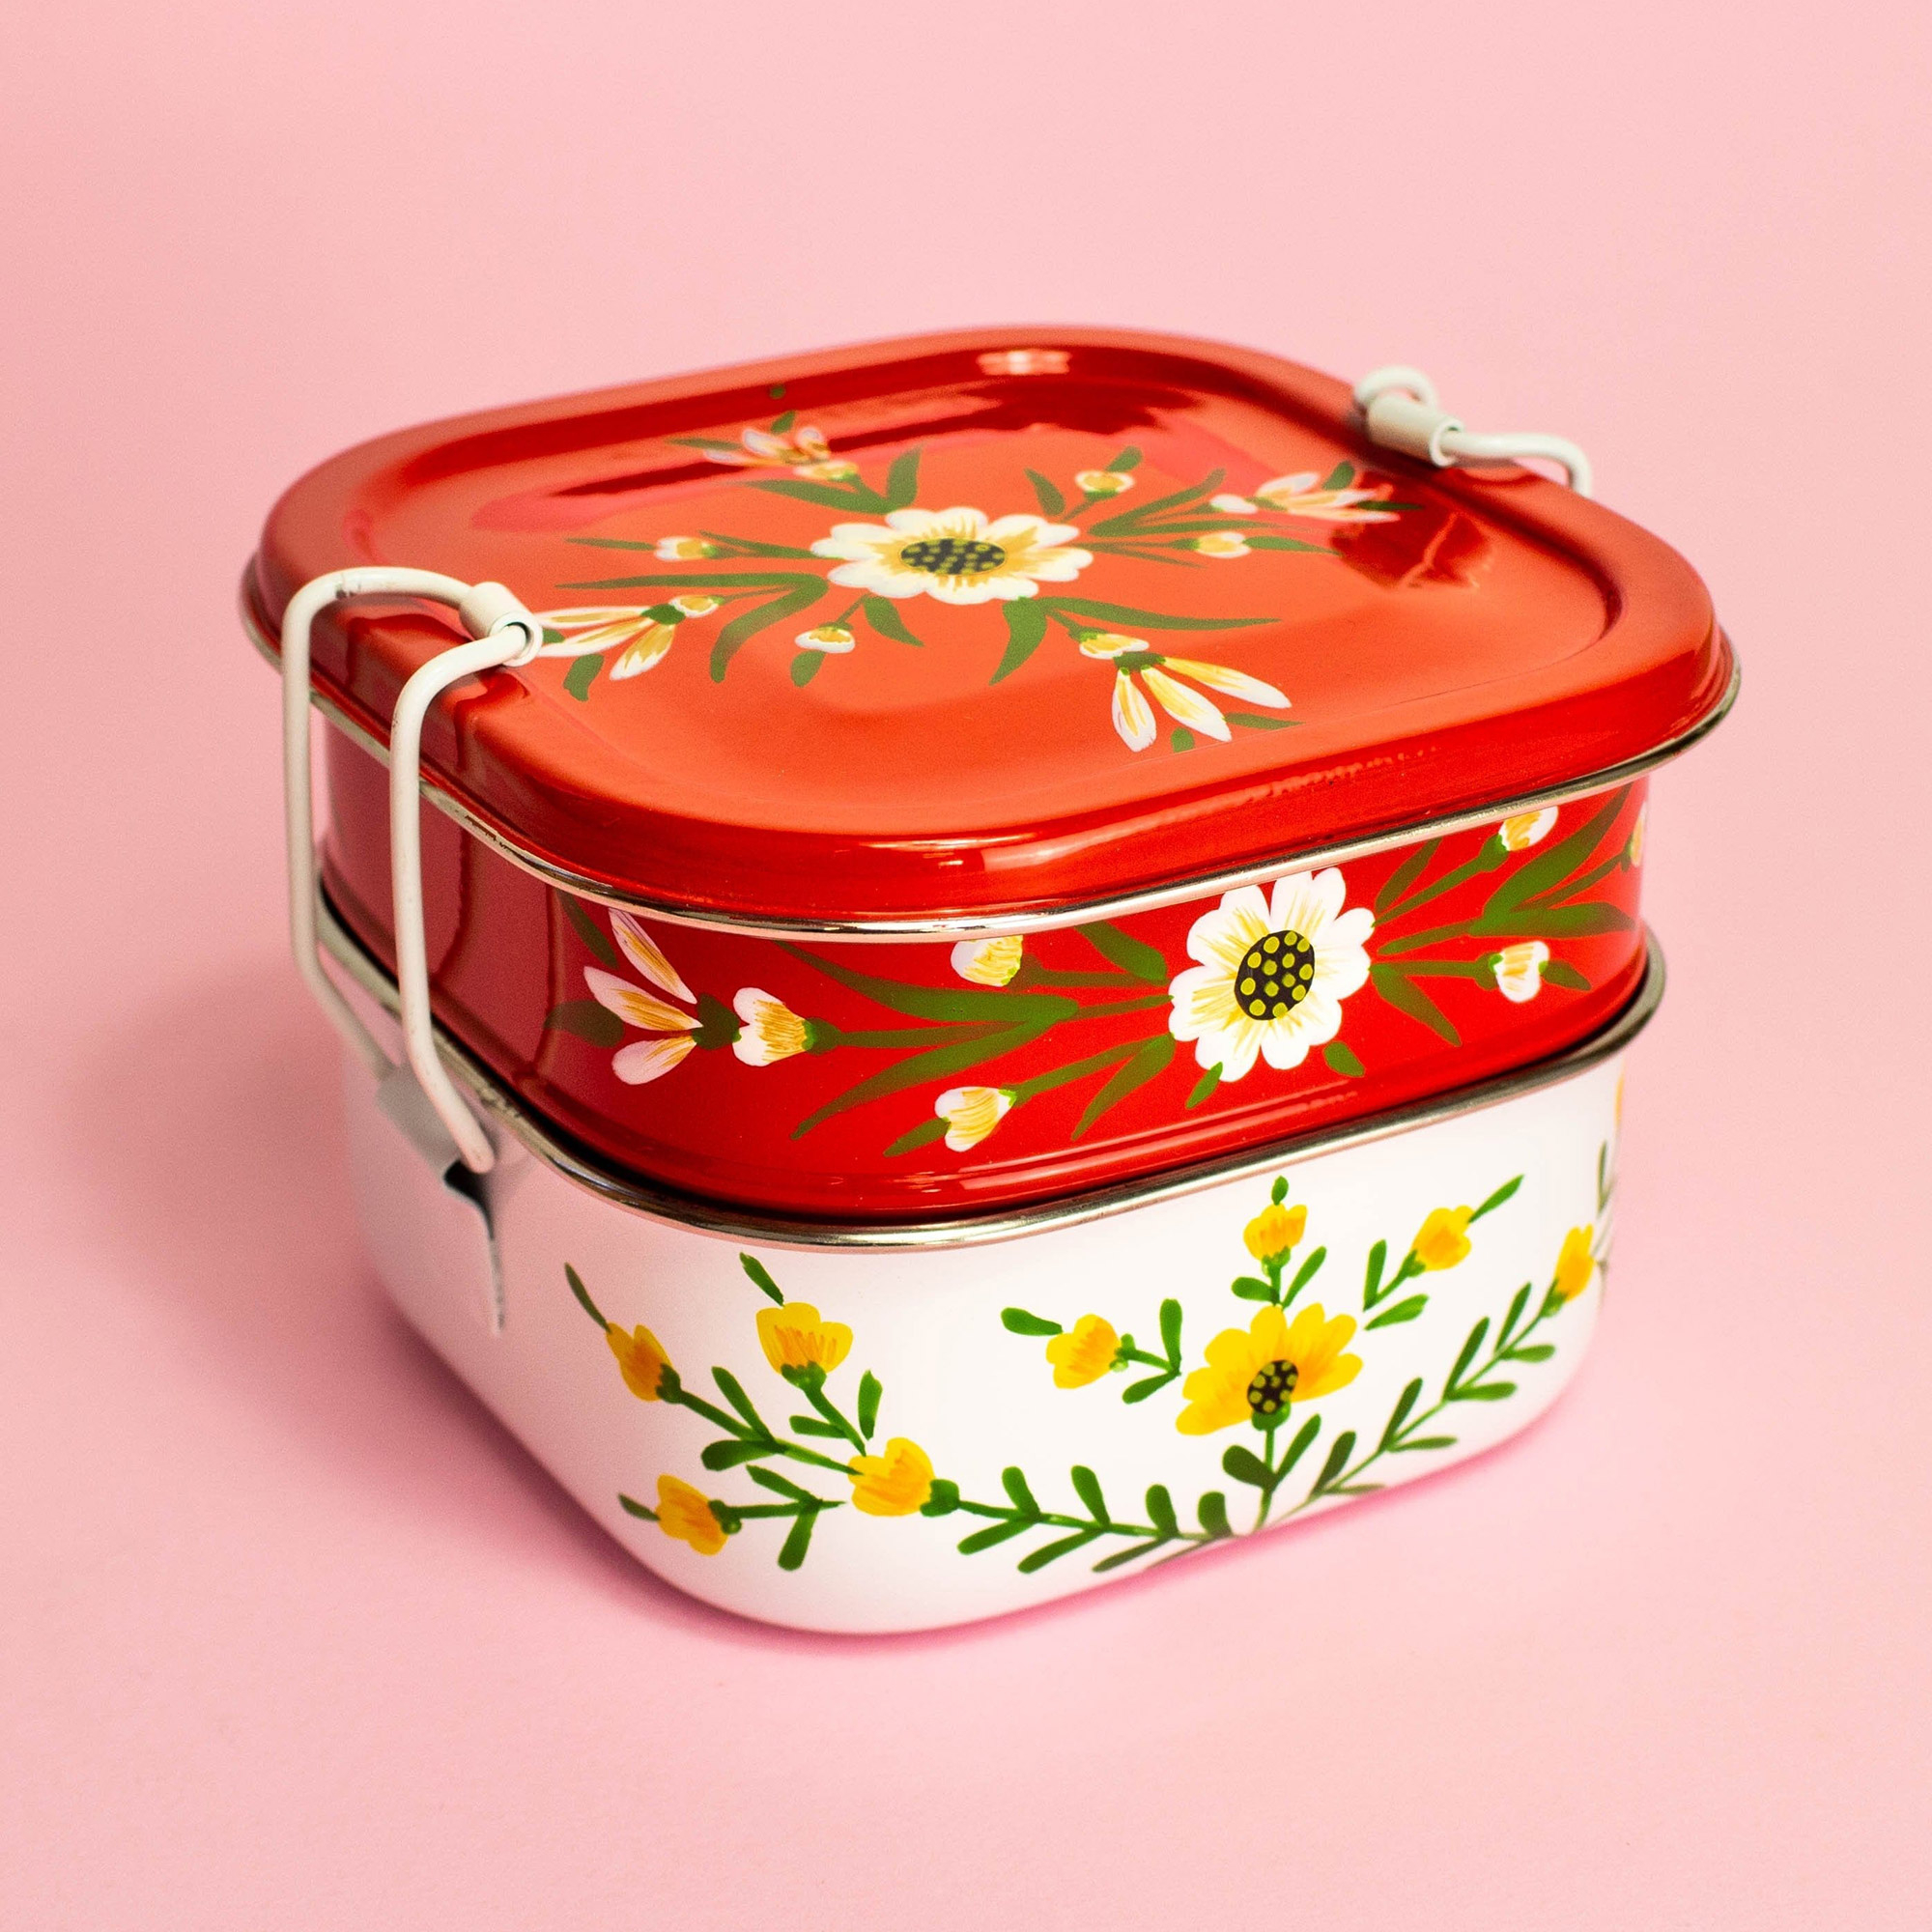 Stainless Steel Lunch Box Tiffin Red and White Floral, 'Two-Tier Tiffin